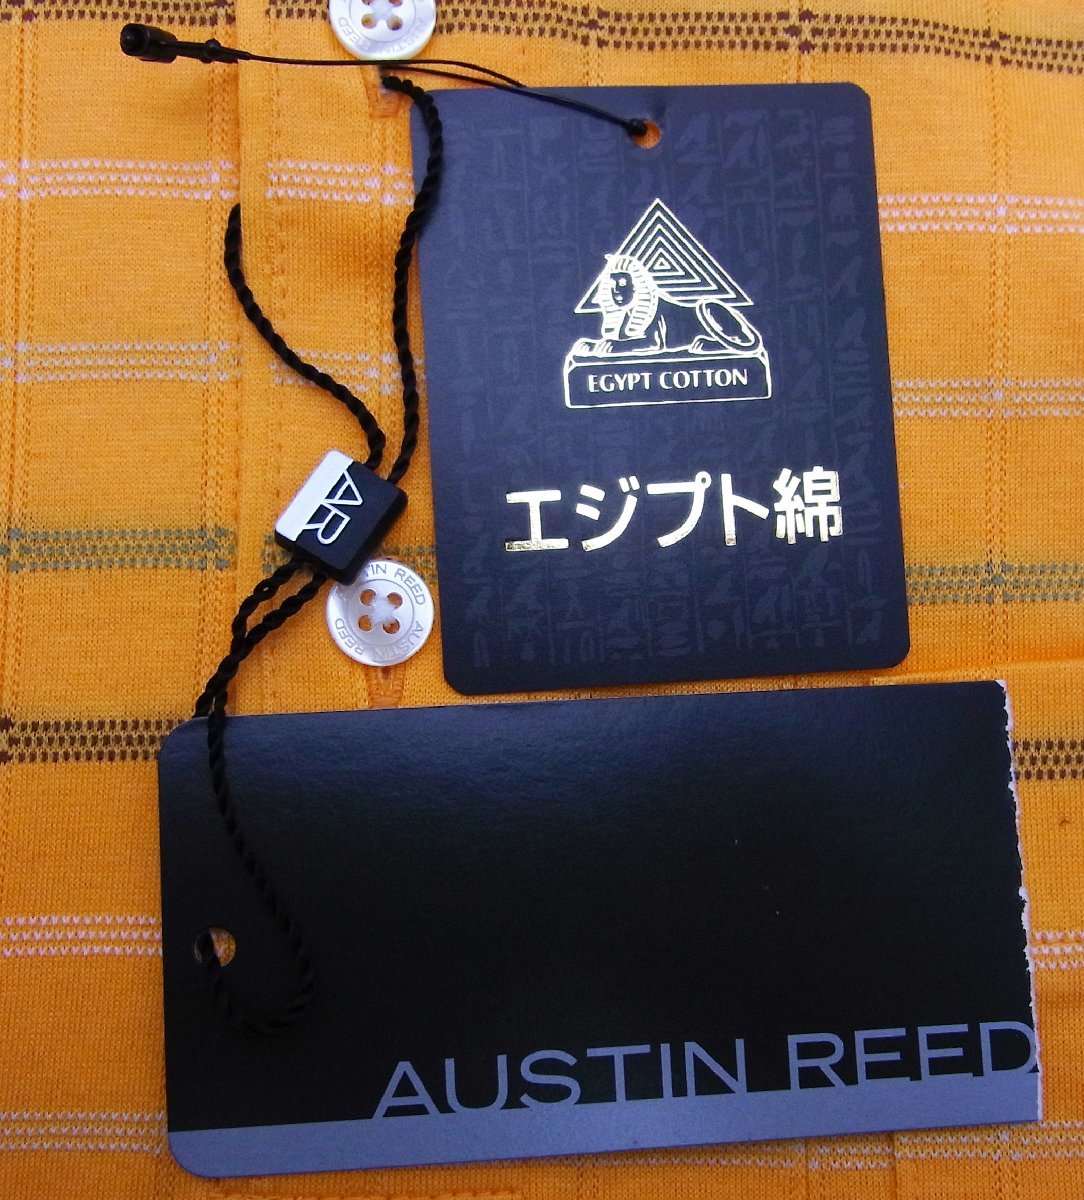 AUSTIN REED Austin Lead * polo-shirt with short sleeves orange *ejipto cotton 100% size :S* tag attaching not yet have on goods *U0519231